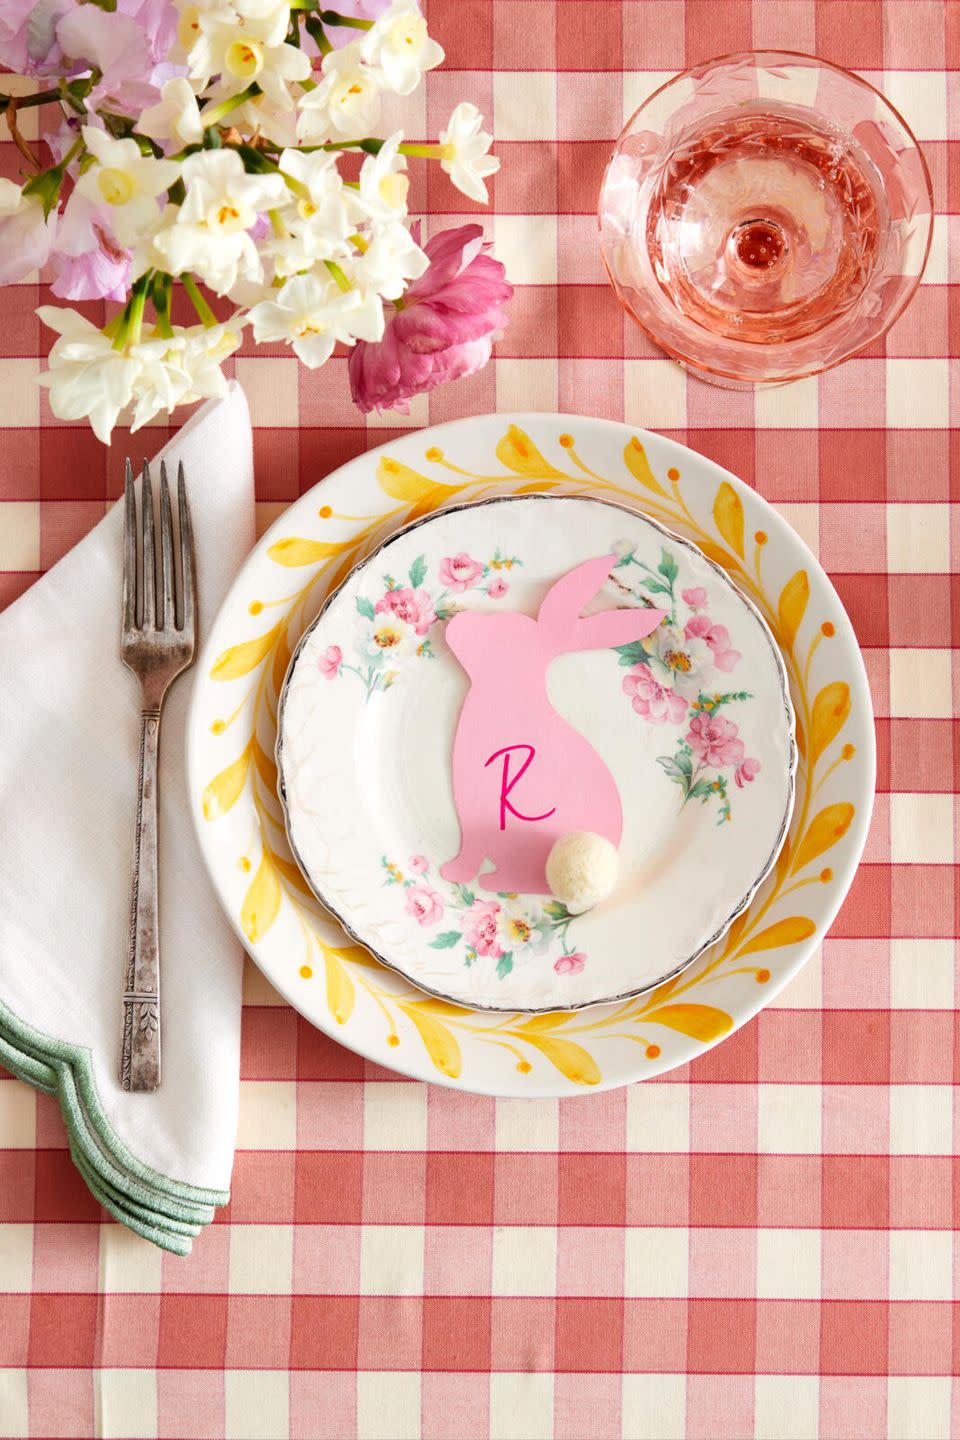 bunny shape placecard made from pink paper with a pom pom tail set on a plate